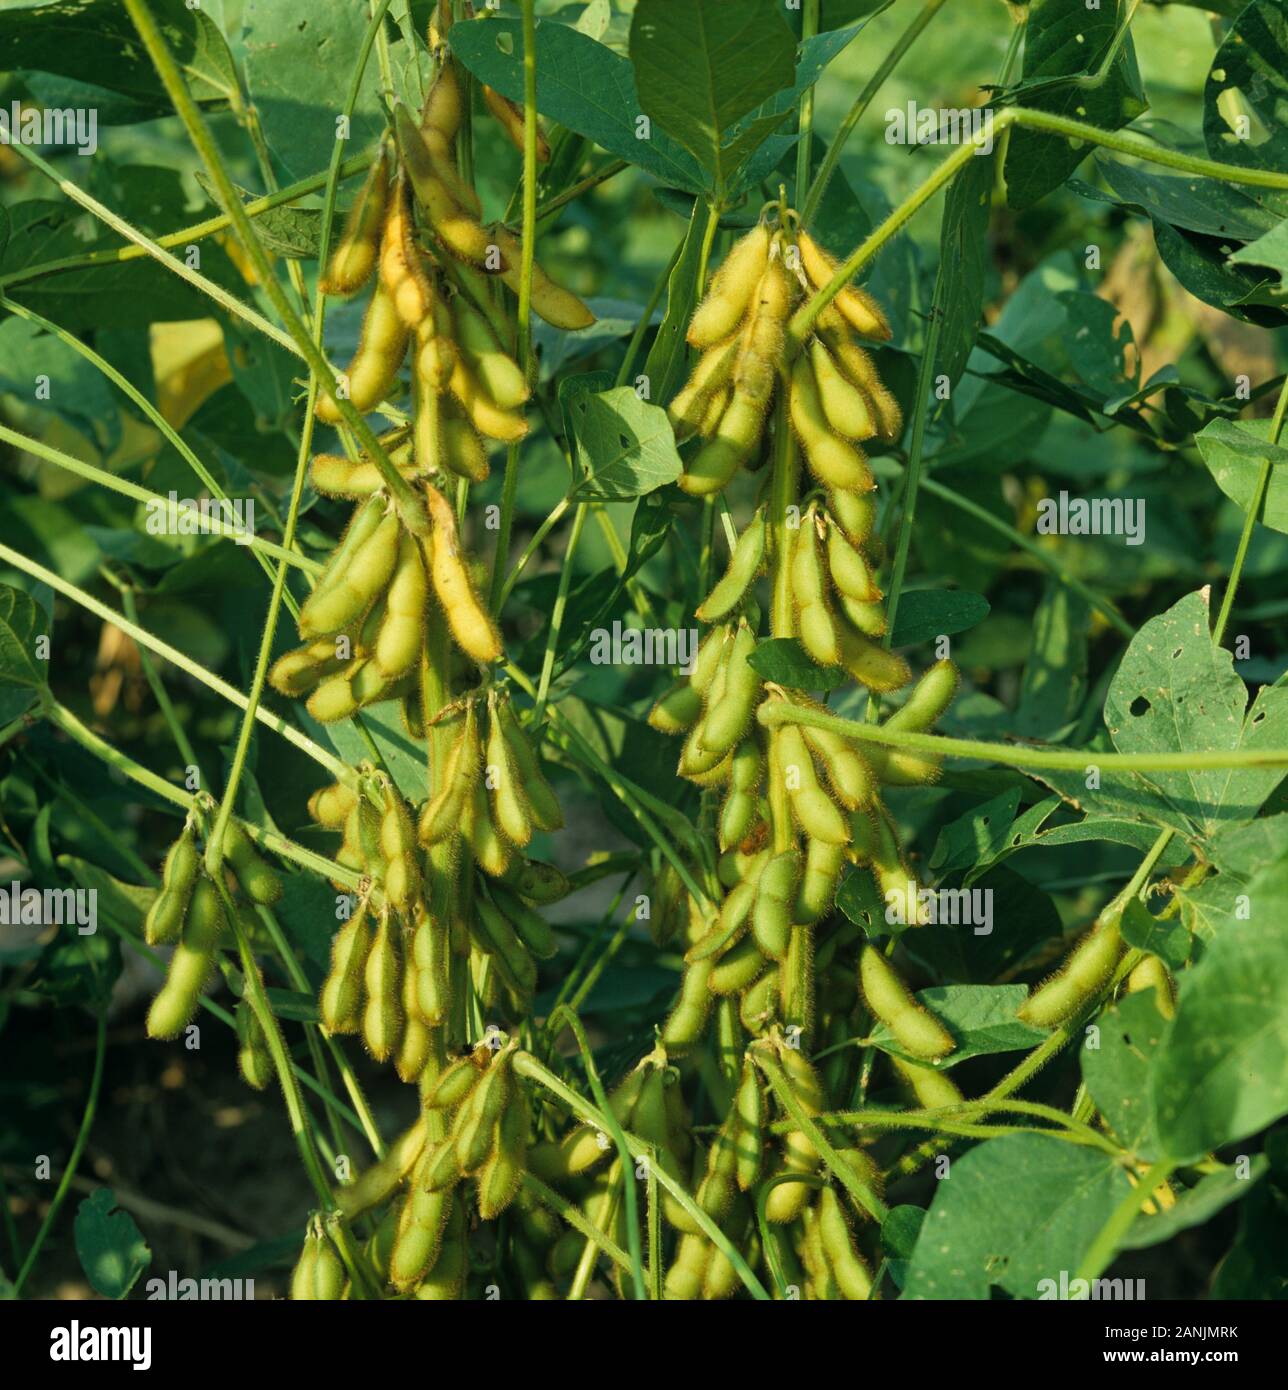 Green, mature soybean (Glycine max) pods on plants with green leaves, Louisiana, USA, October Stock Photo